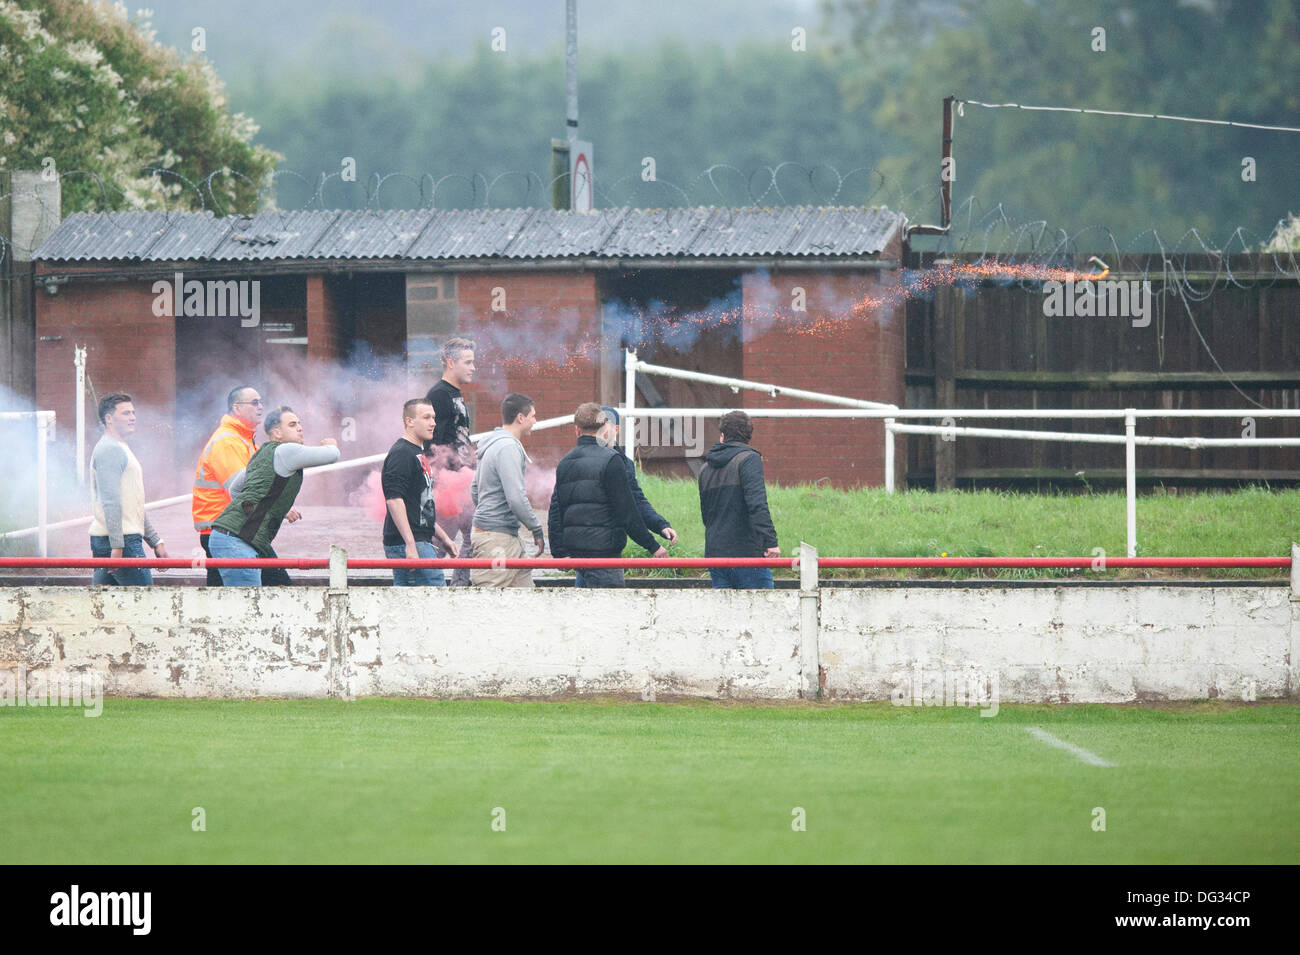 Atherstone, Warwickshire, UK. 12th October, 2013. A group of fans from the home end of the Sheepy Road ground walk around the perimeter of the pitch and scale the fences to attack the visiting supporters (Barrow AFC). A firework was also thrown towards to the terrace of the away following. A flag was stolen from the Barrow AFC fans and then set on fire using a lit firework. Atherstone chairman Rob Weale apologised for what occurred and vowed to pursue the perpetrators. Stock Photo